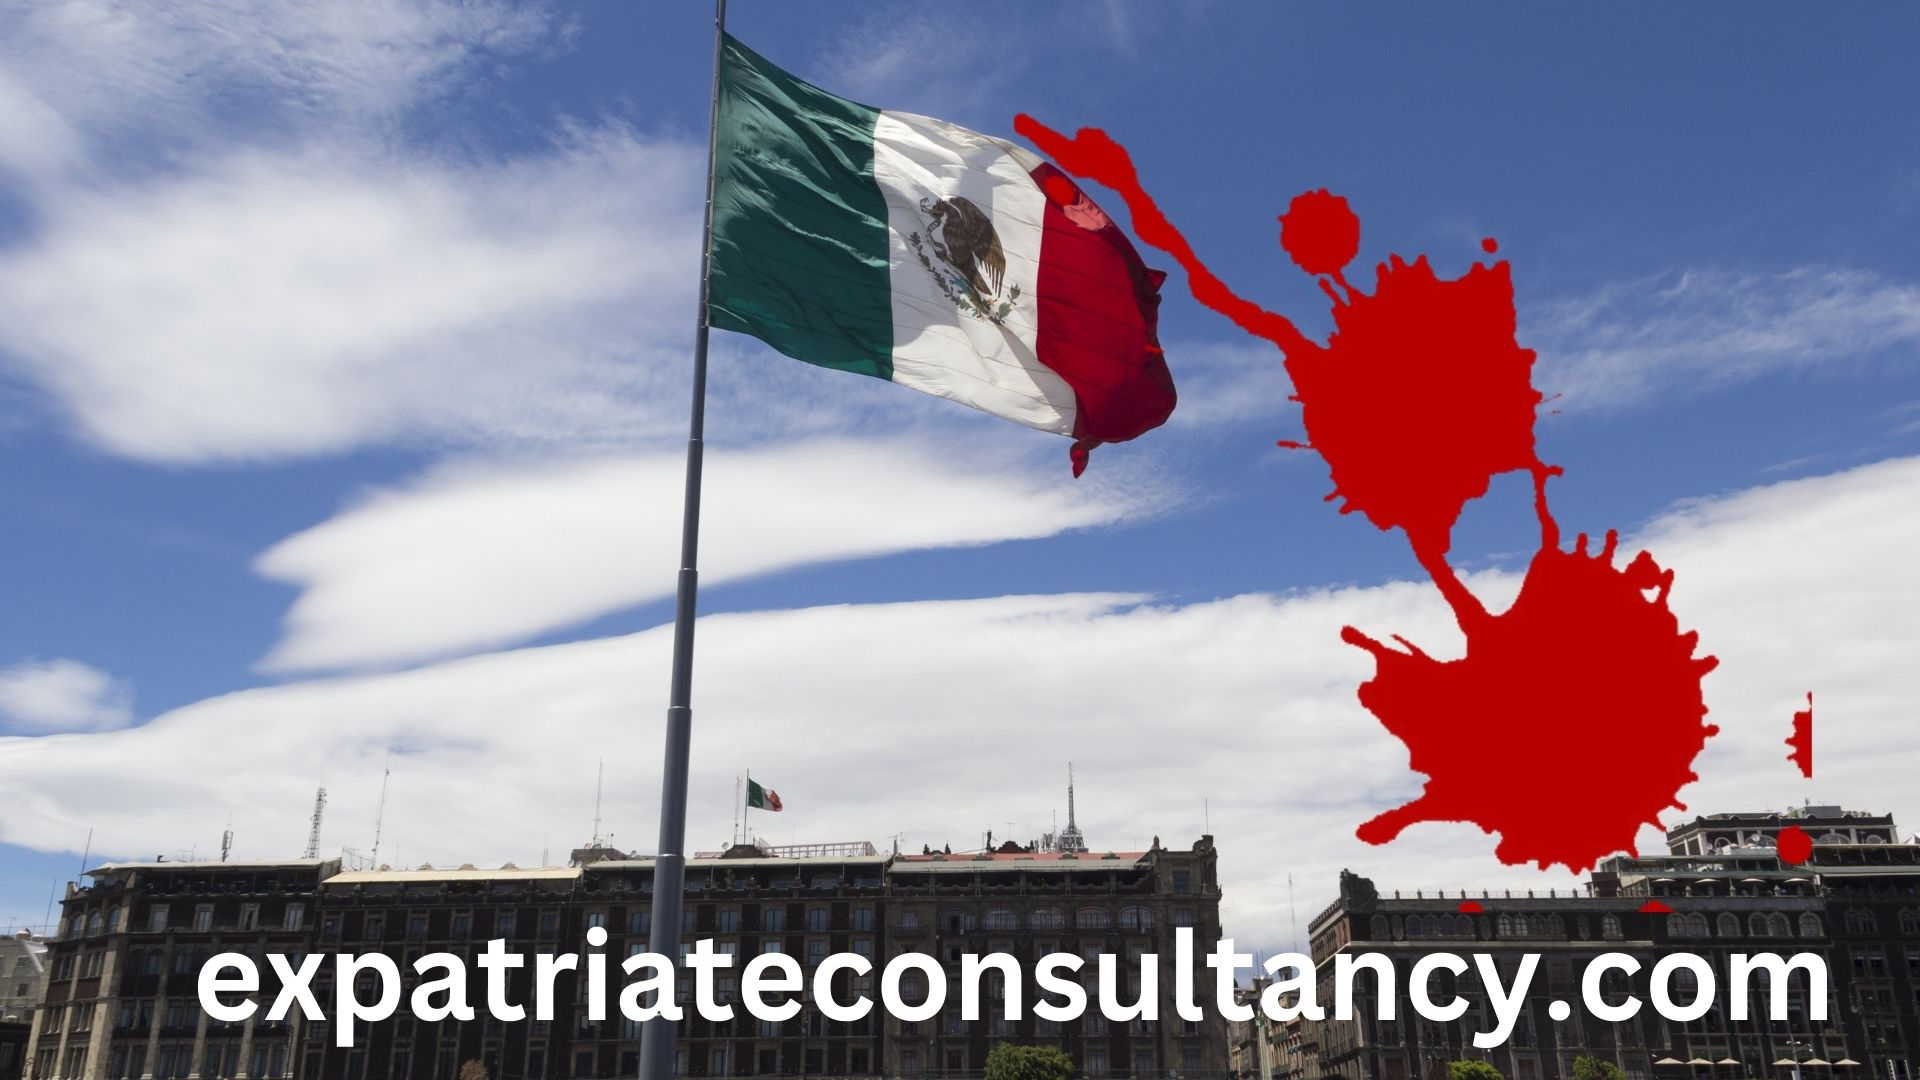 National flag and red stain to illustrate article about the Most Dangerous Cities in Mexico